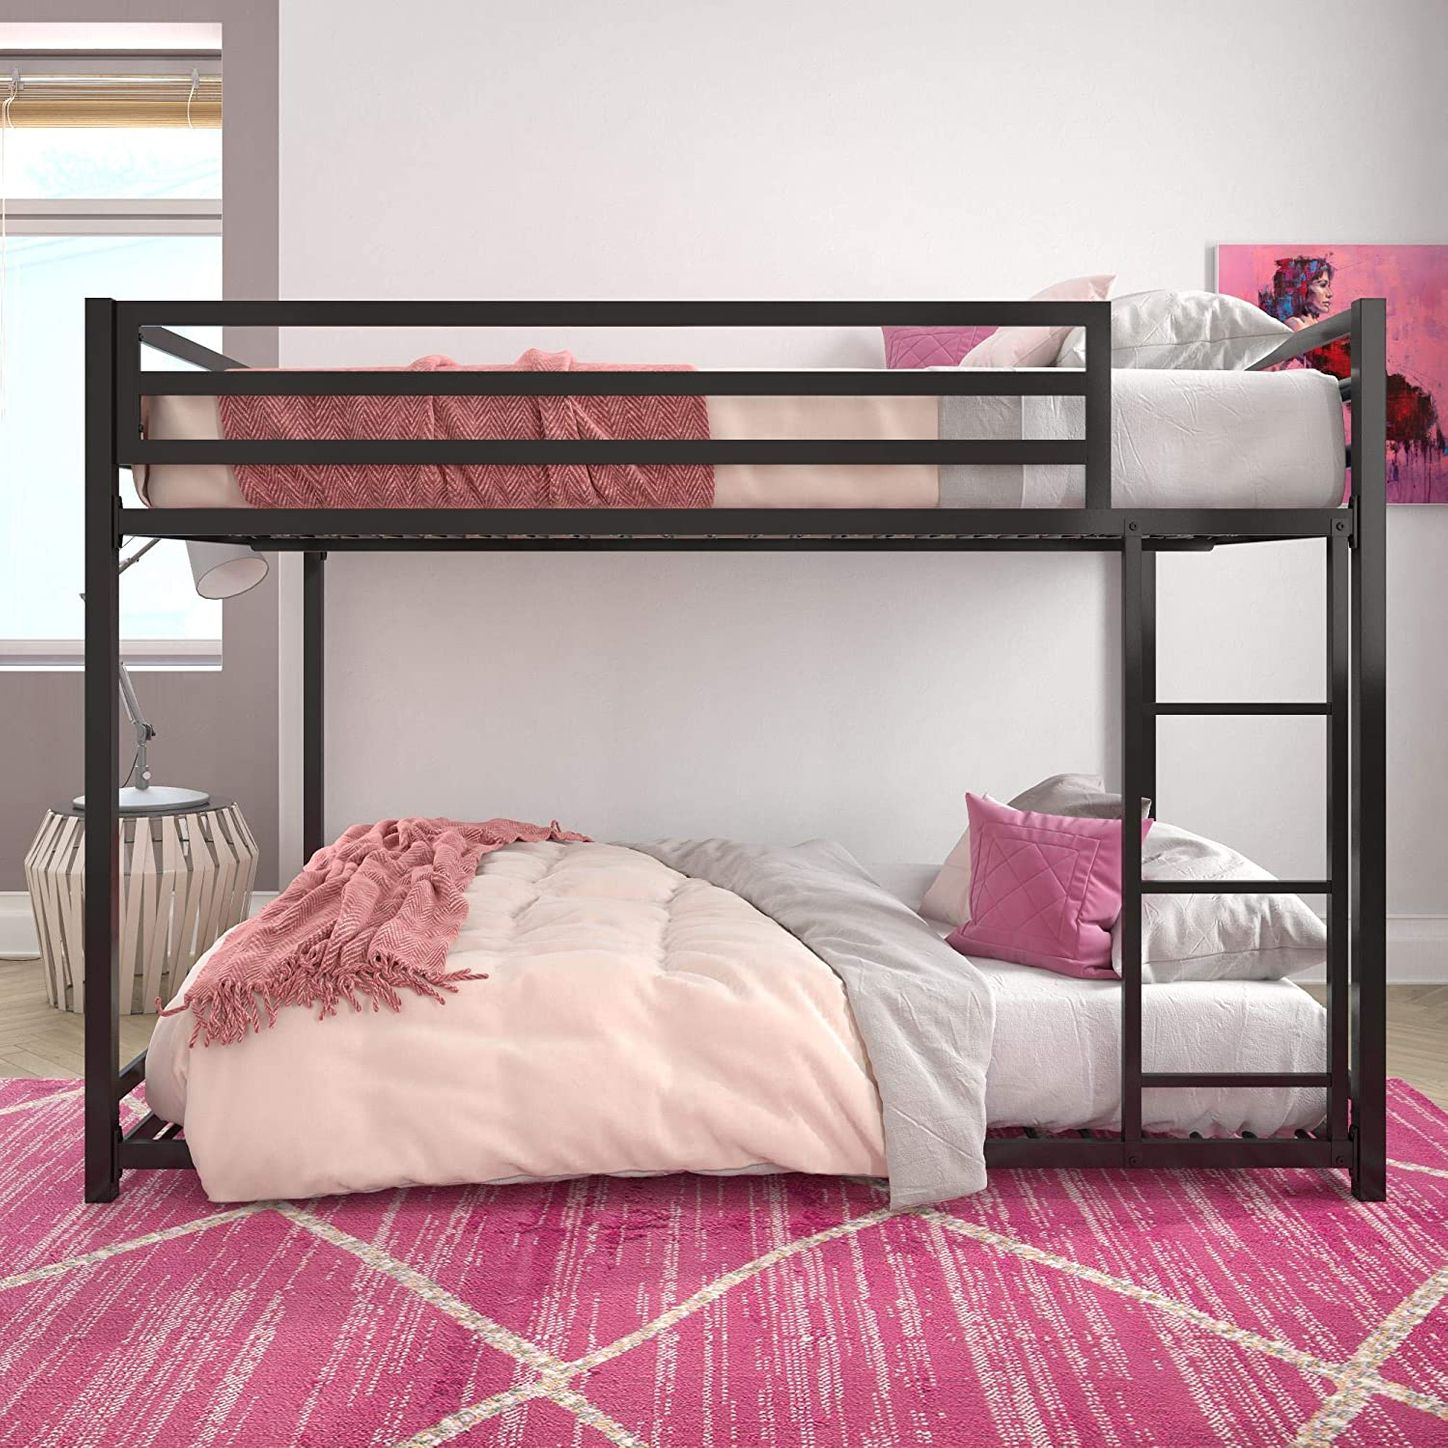 8 Best Bunk Beds 2020 The Strategist, Full Top Bunk Bed